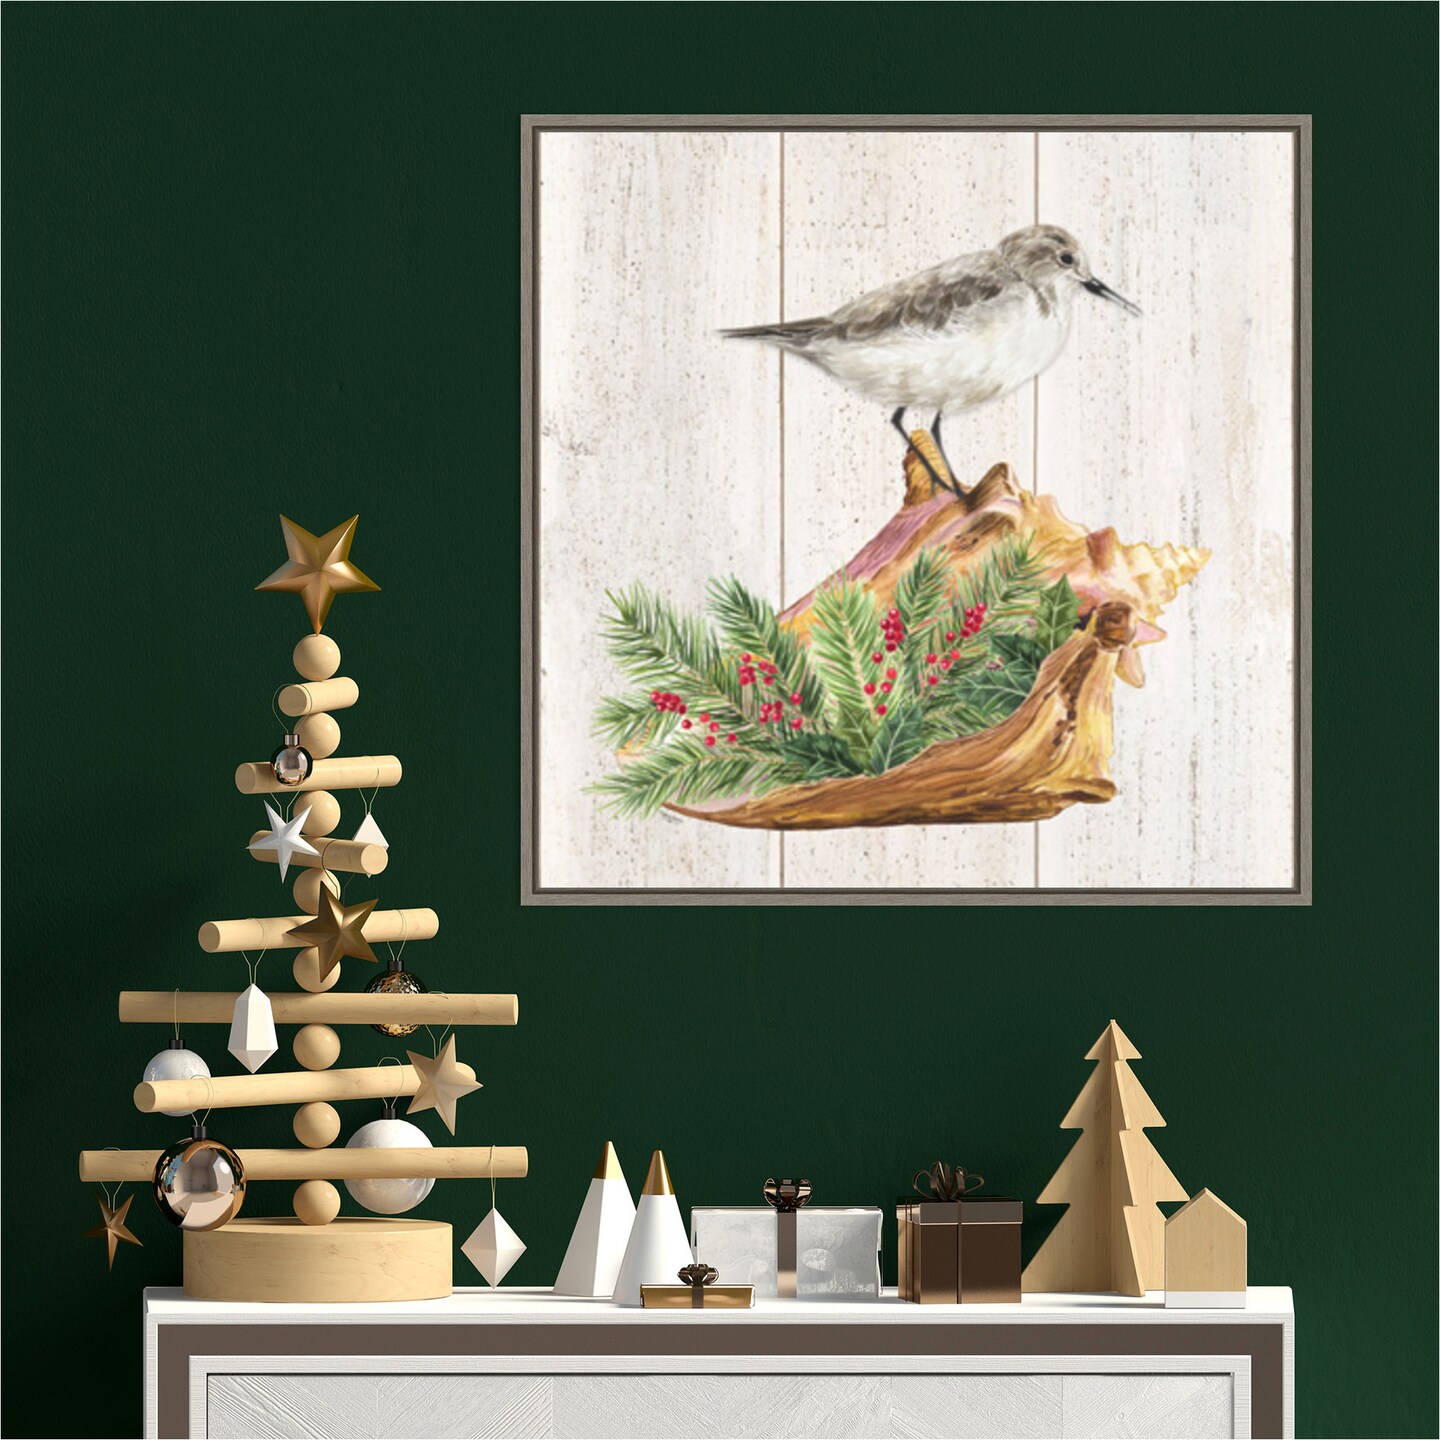 Christmas on the Coast III by Tara Reed 22-in. W x 22-in. H. Canvas Wall Art Print Framed in Grey